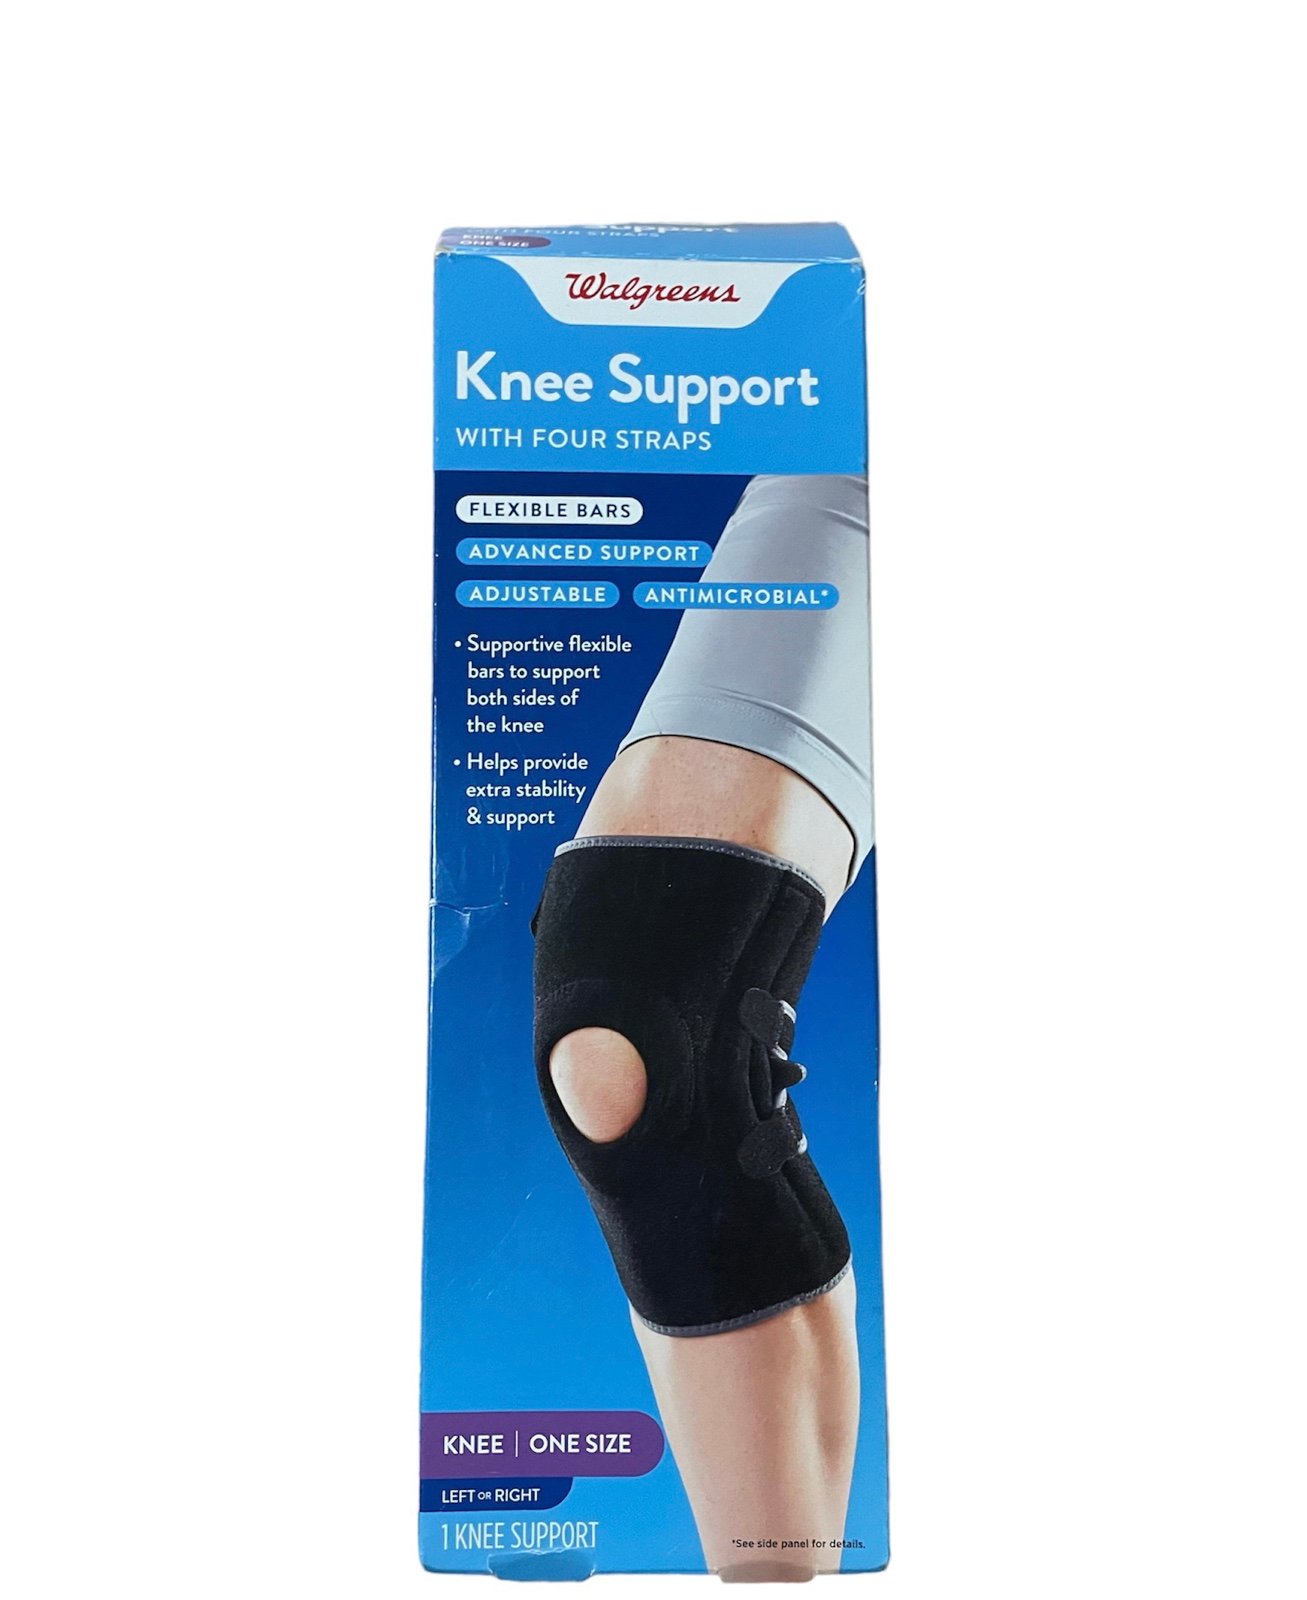 Knee support with four straps flexible bars one size left or right -new qjCPIemGh